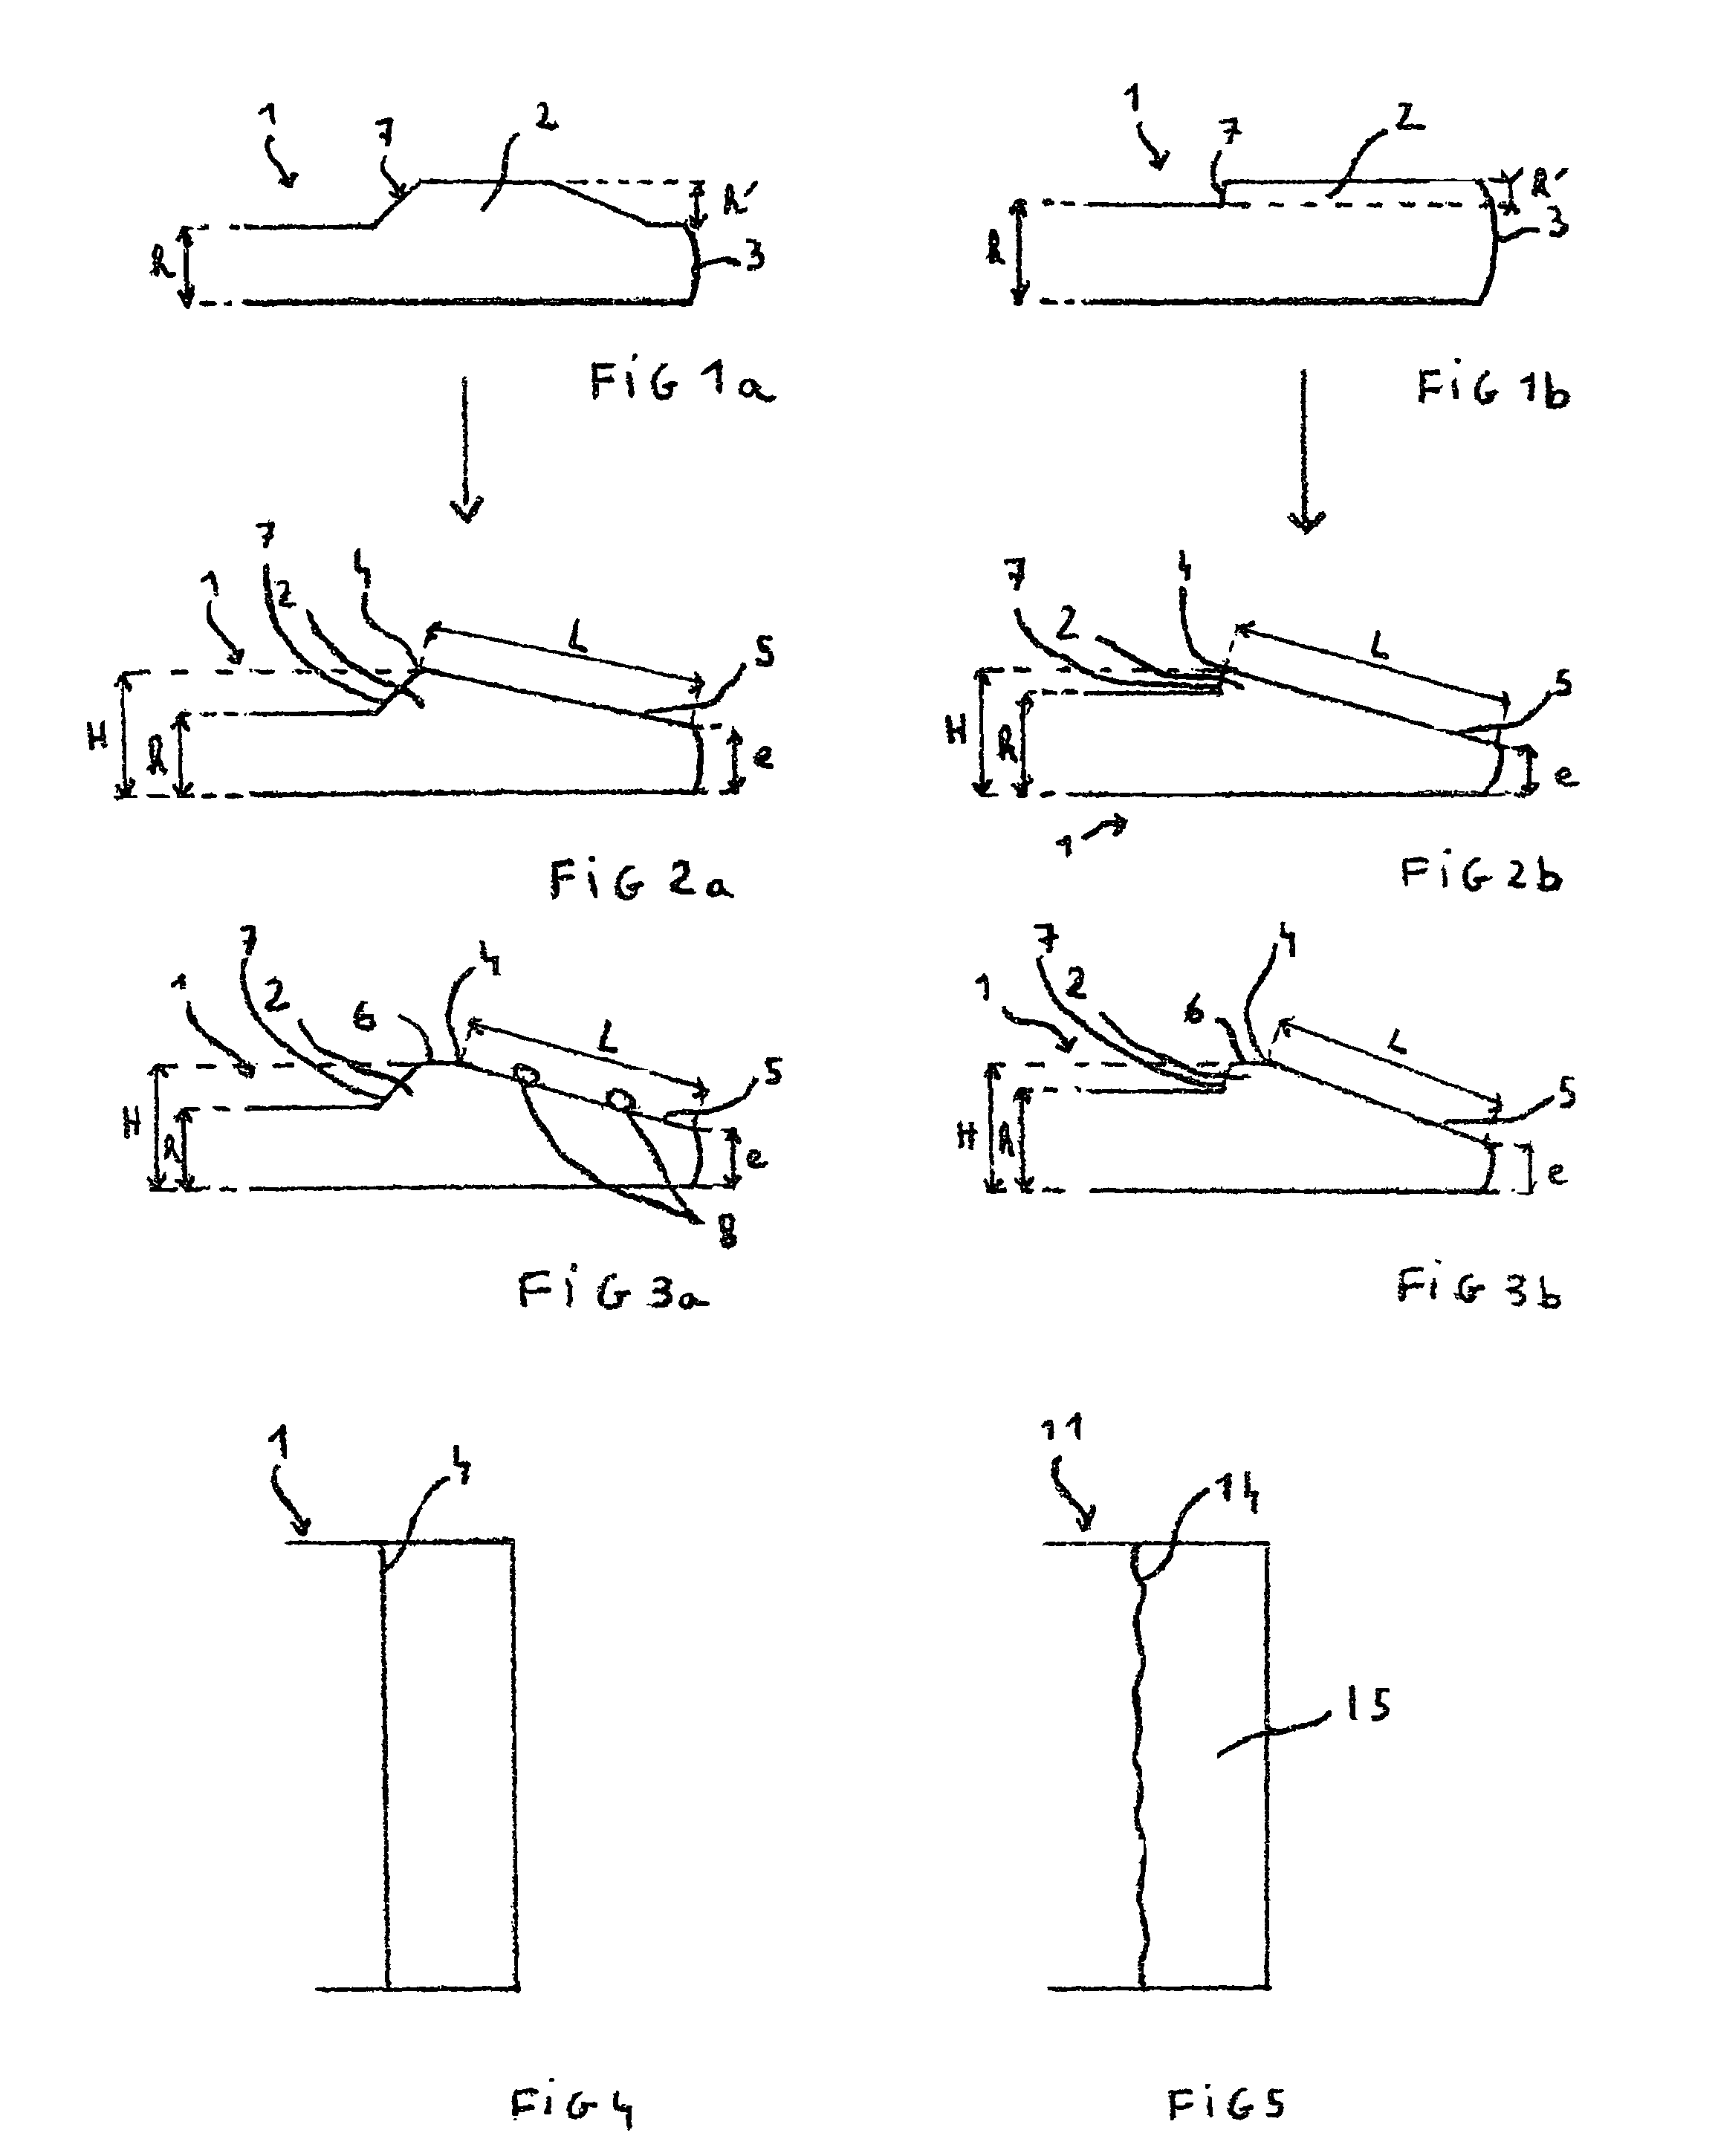 Glass-ceramic plate and method for making same